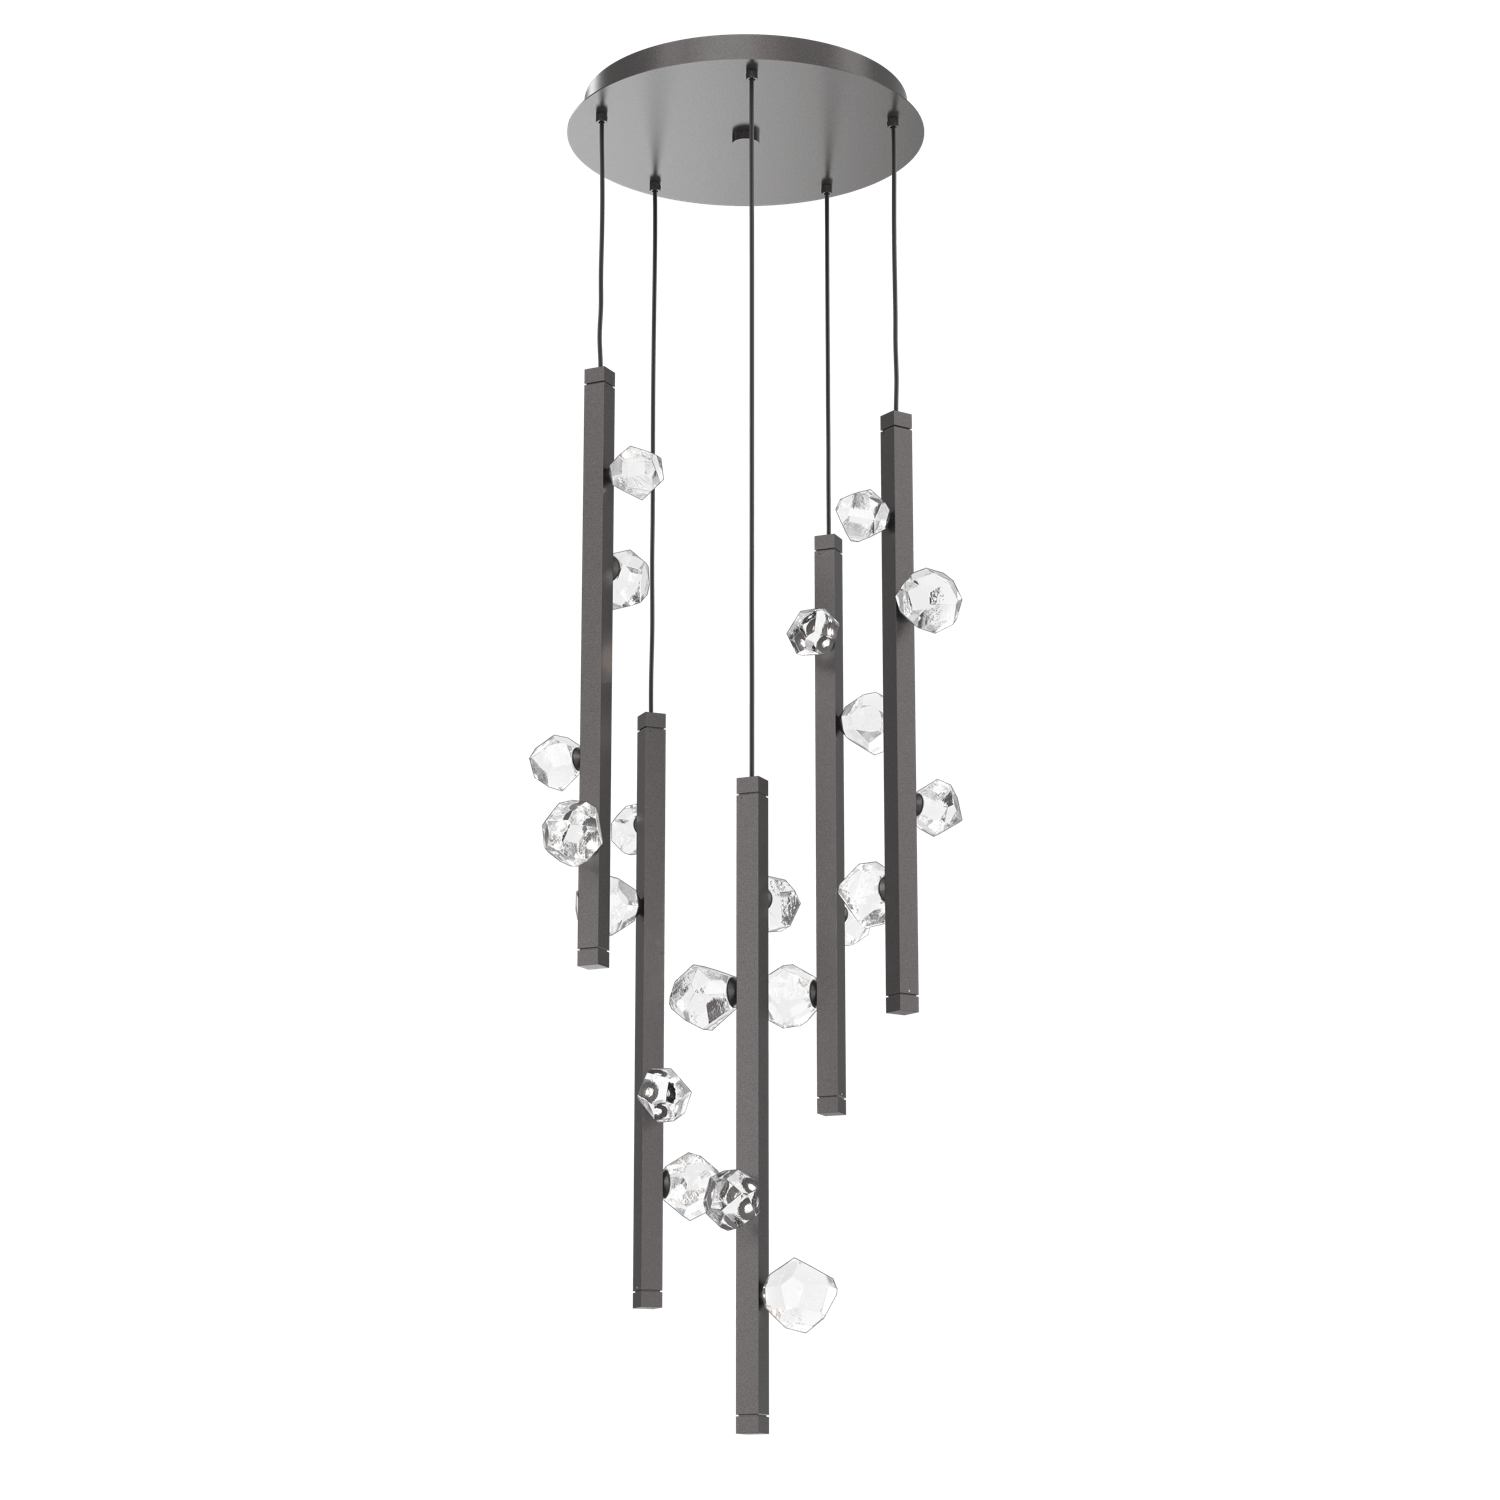 CHB0070-05-GP-Hammerton-Studio-Stella-5-light-round-pendant-chandelier-with-graphite-finish-and-clear-cast-glass-shades-and-LED-lamping